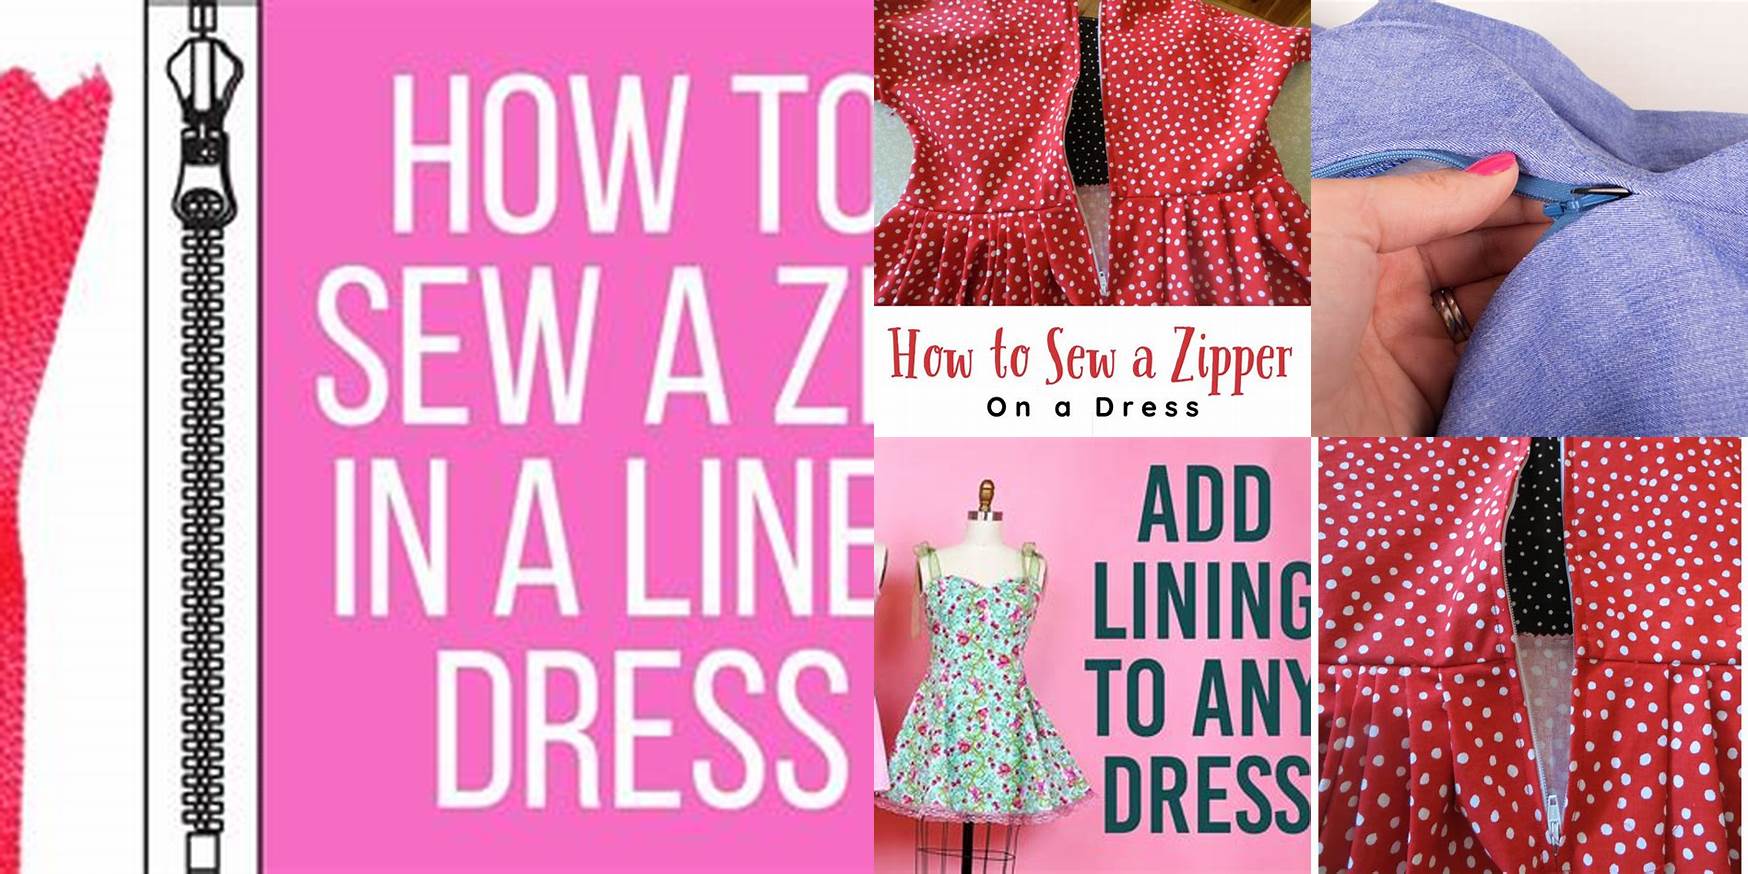 How To Sew A Zipper On A Dress With Lining